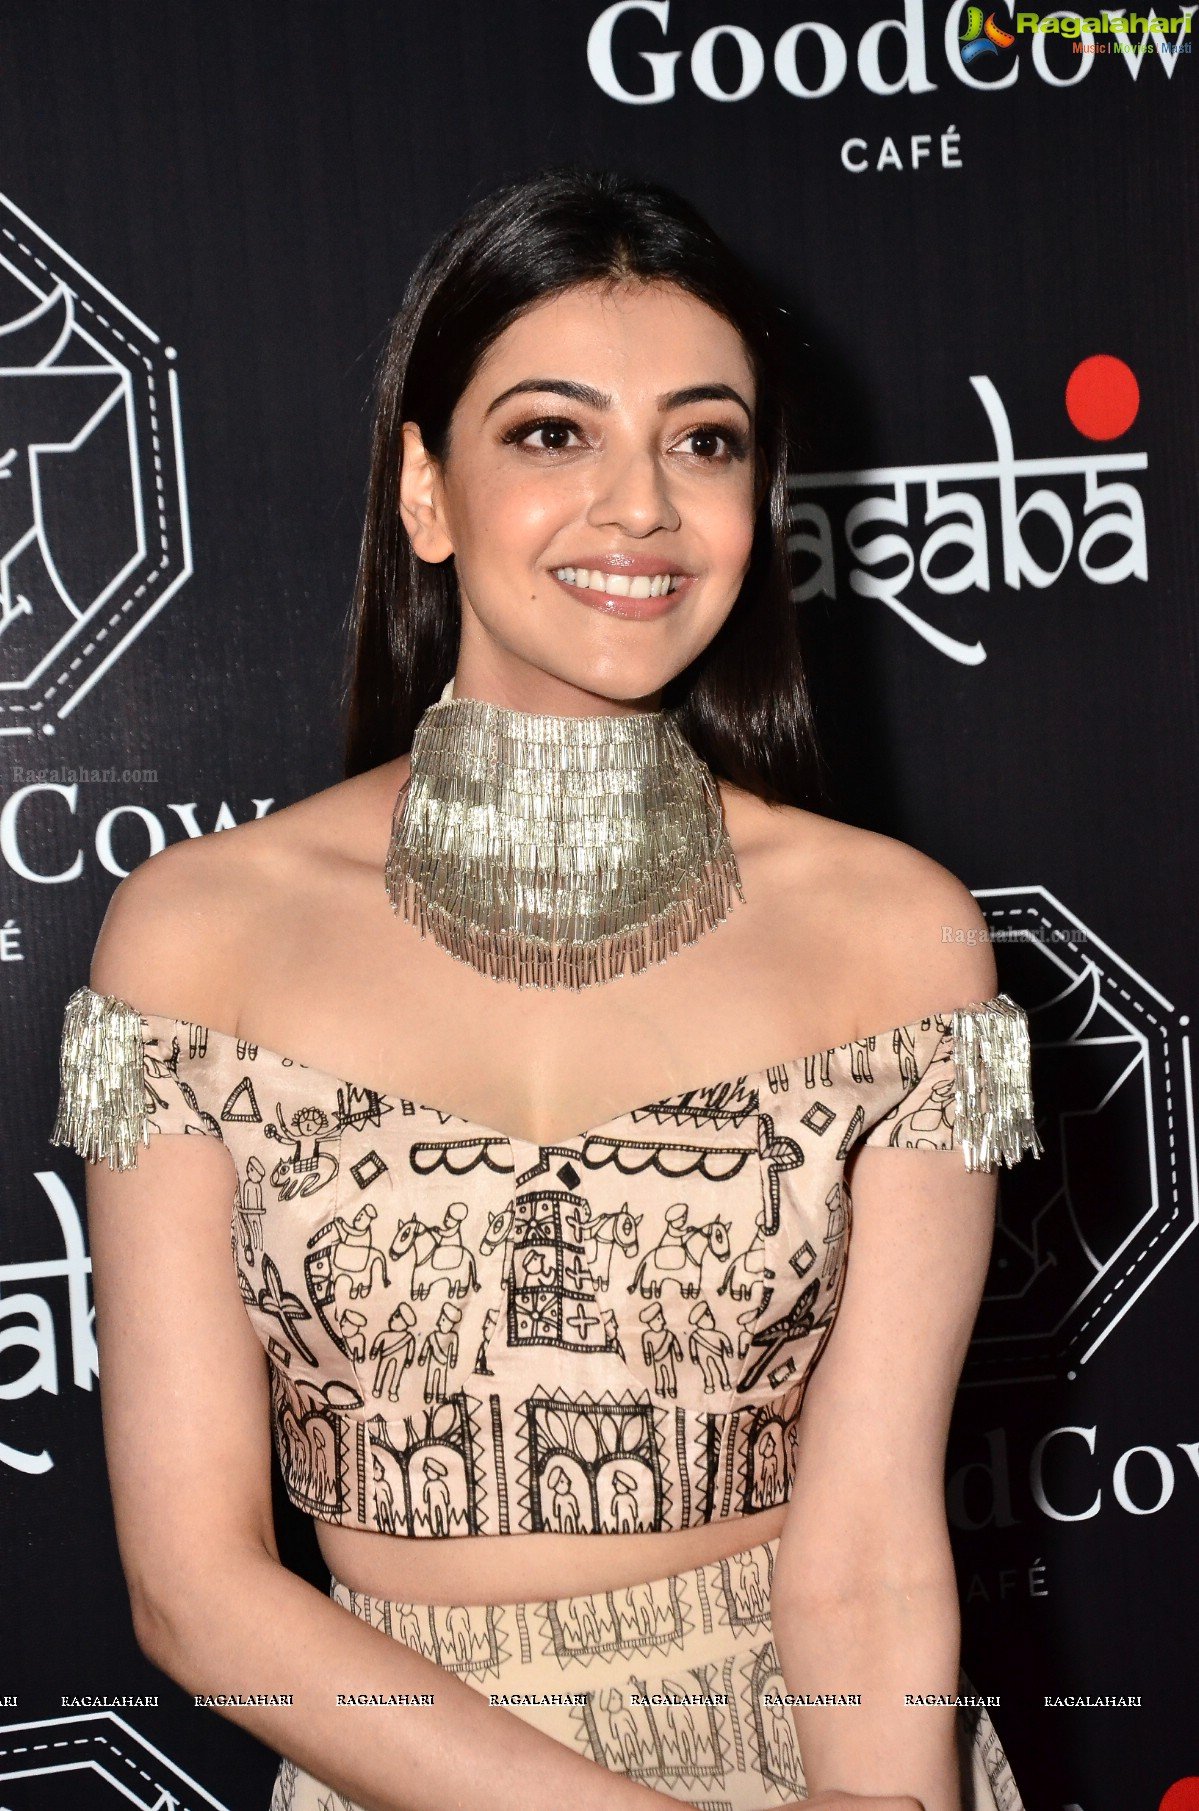 Kajal Aggarwal at Good Cow Cafe and Aquamarine Jewellery Launch, HD Gallery